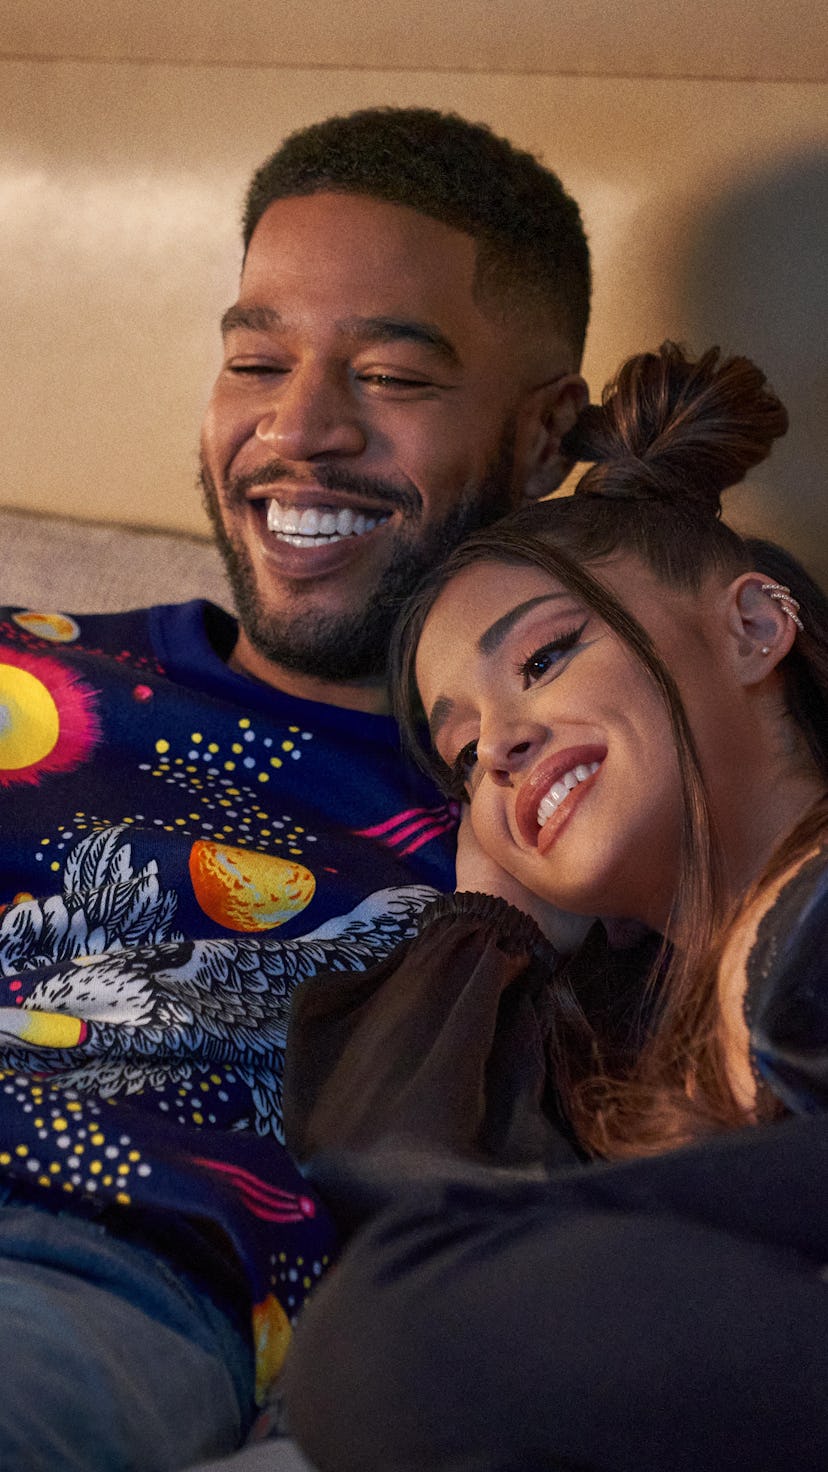 Ariana Grande and Kid Cudi's "Don't Look Up" is about the end of the world.